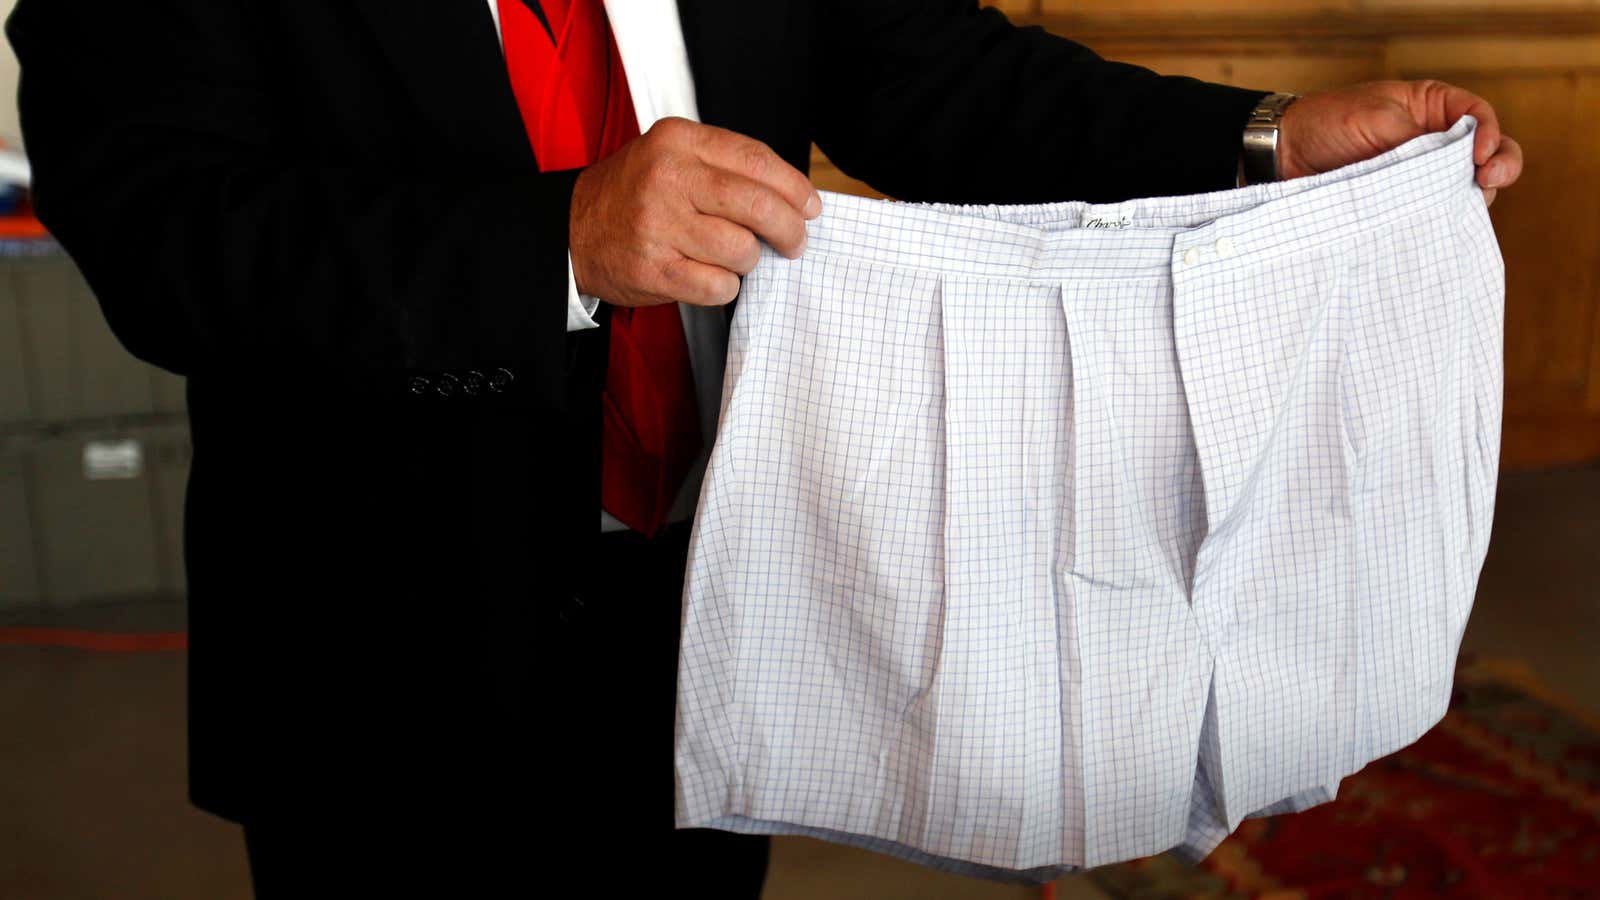 Bernard Madoff’s boxer shorts were sold to pay off his victims. Now, his bank will chip in.